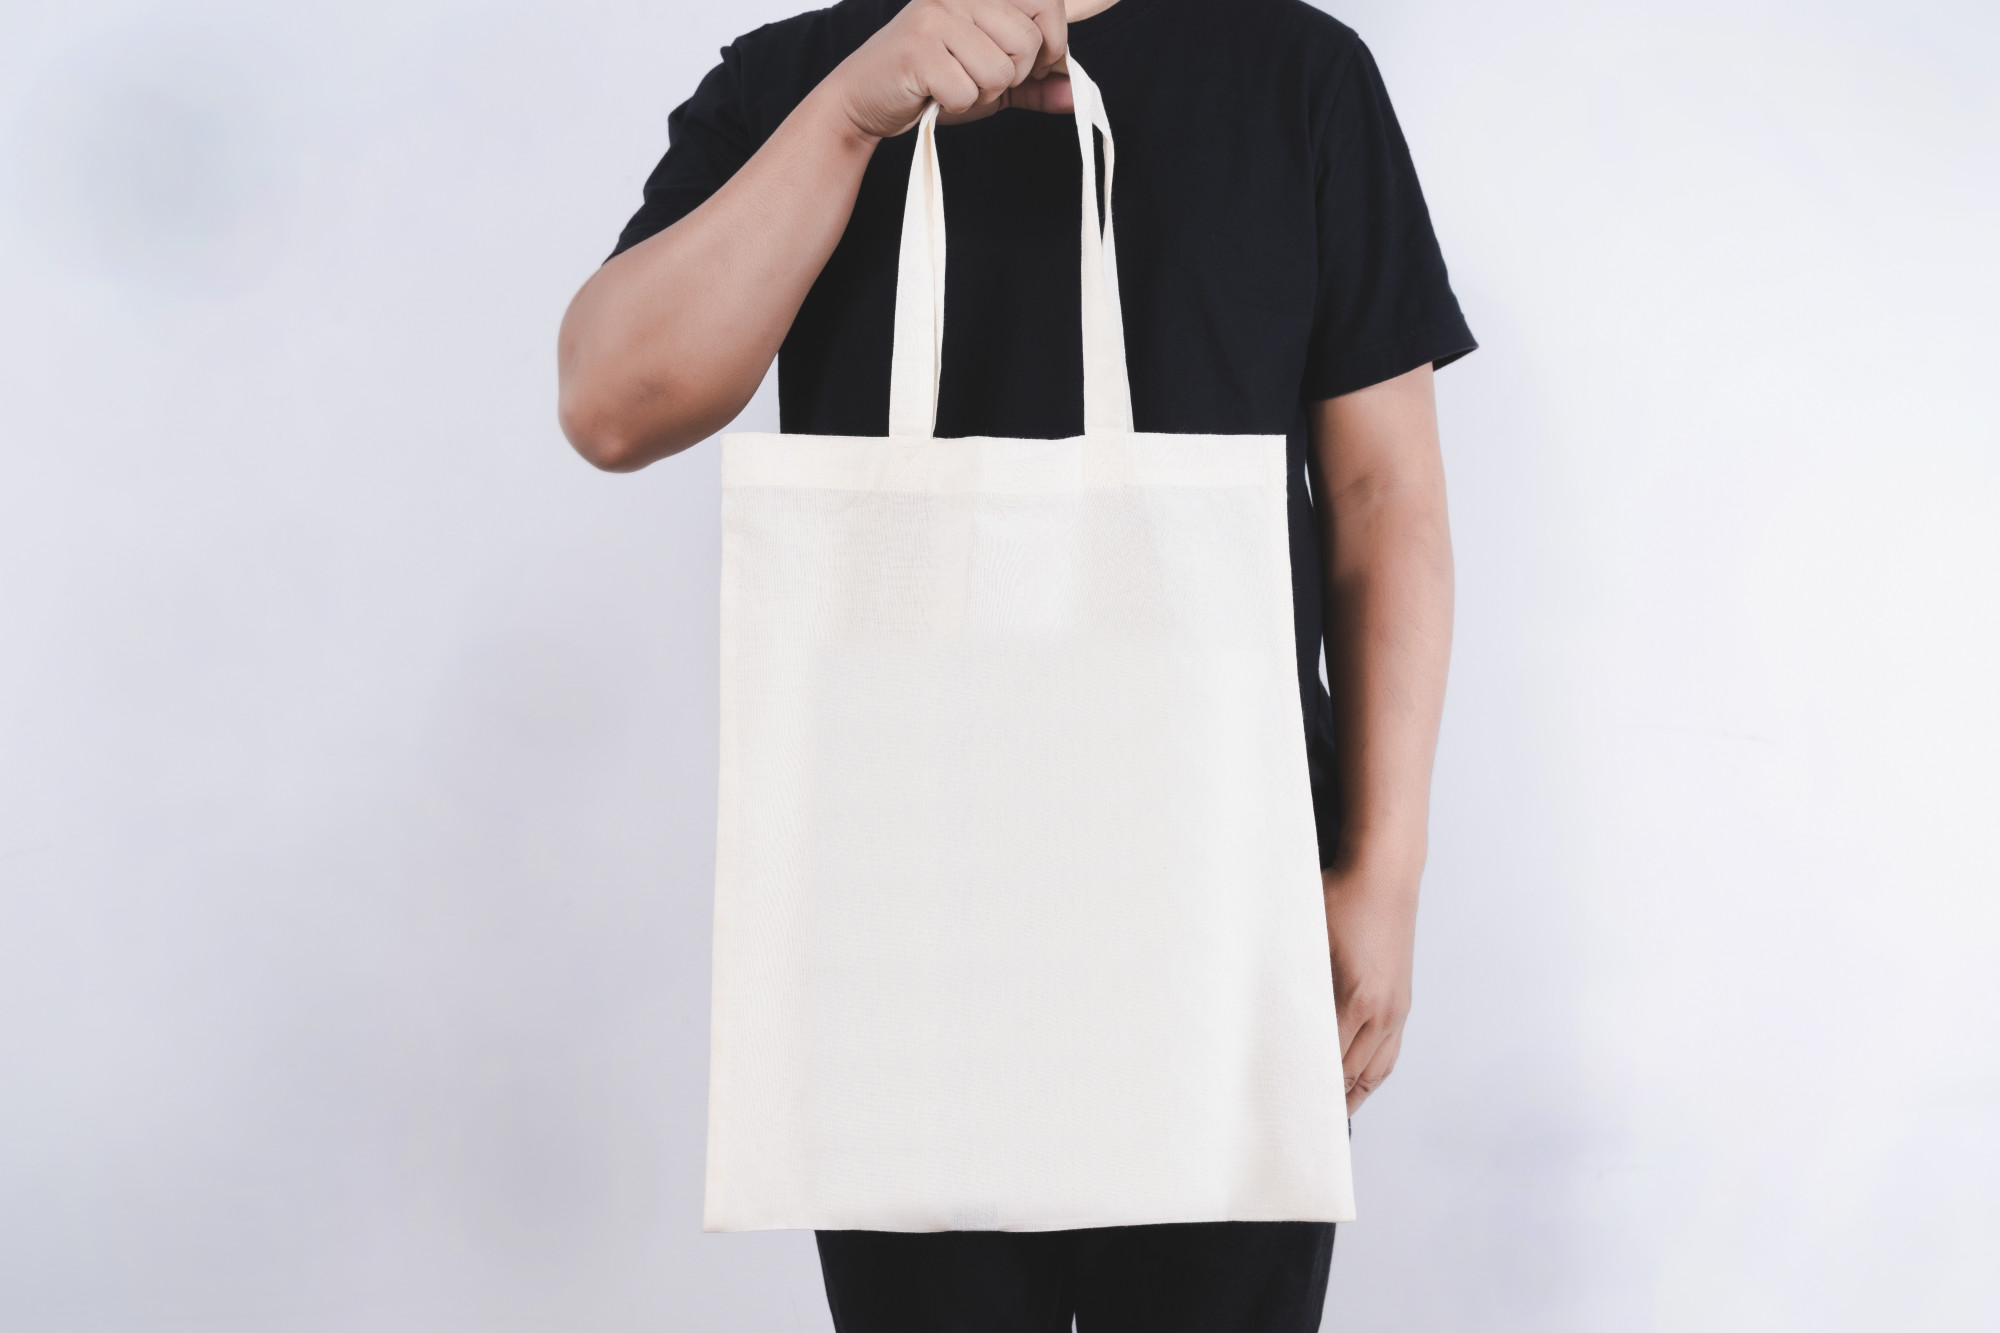 10 Ideas to Make Your Customized Tote Bags Stand Out